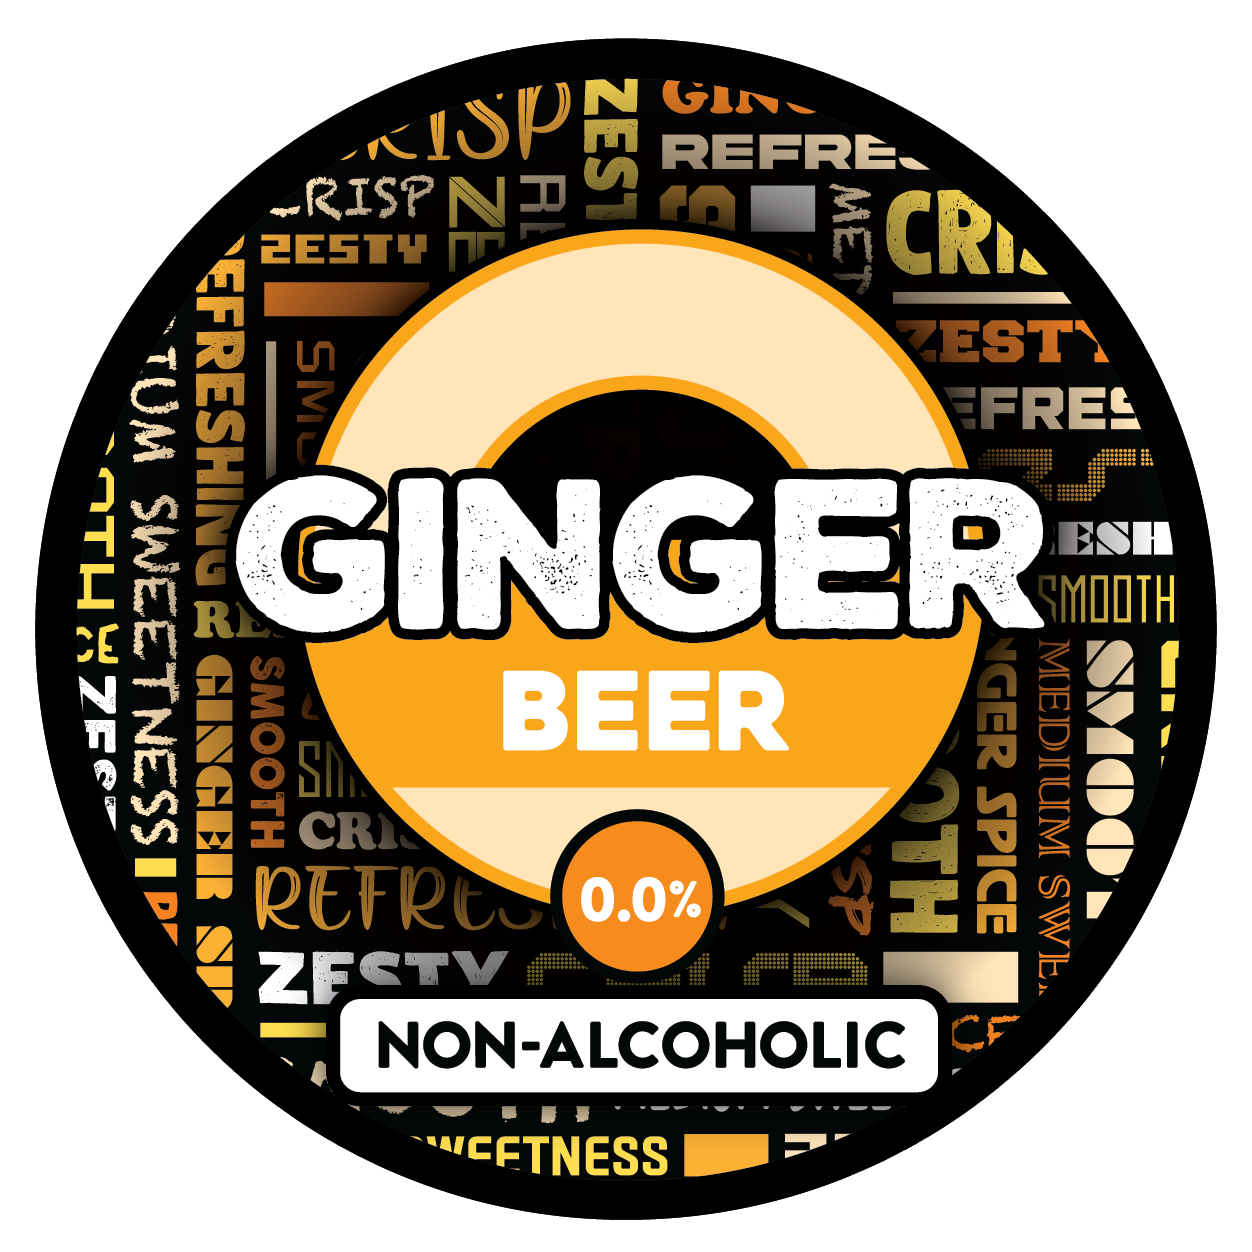 The tap badge for Sprig and Fern's non-alcoholic Ginger Beer